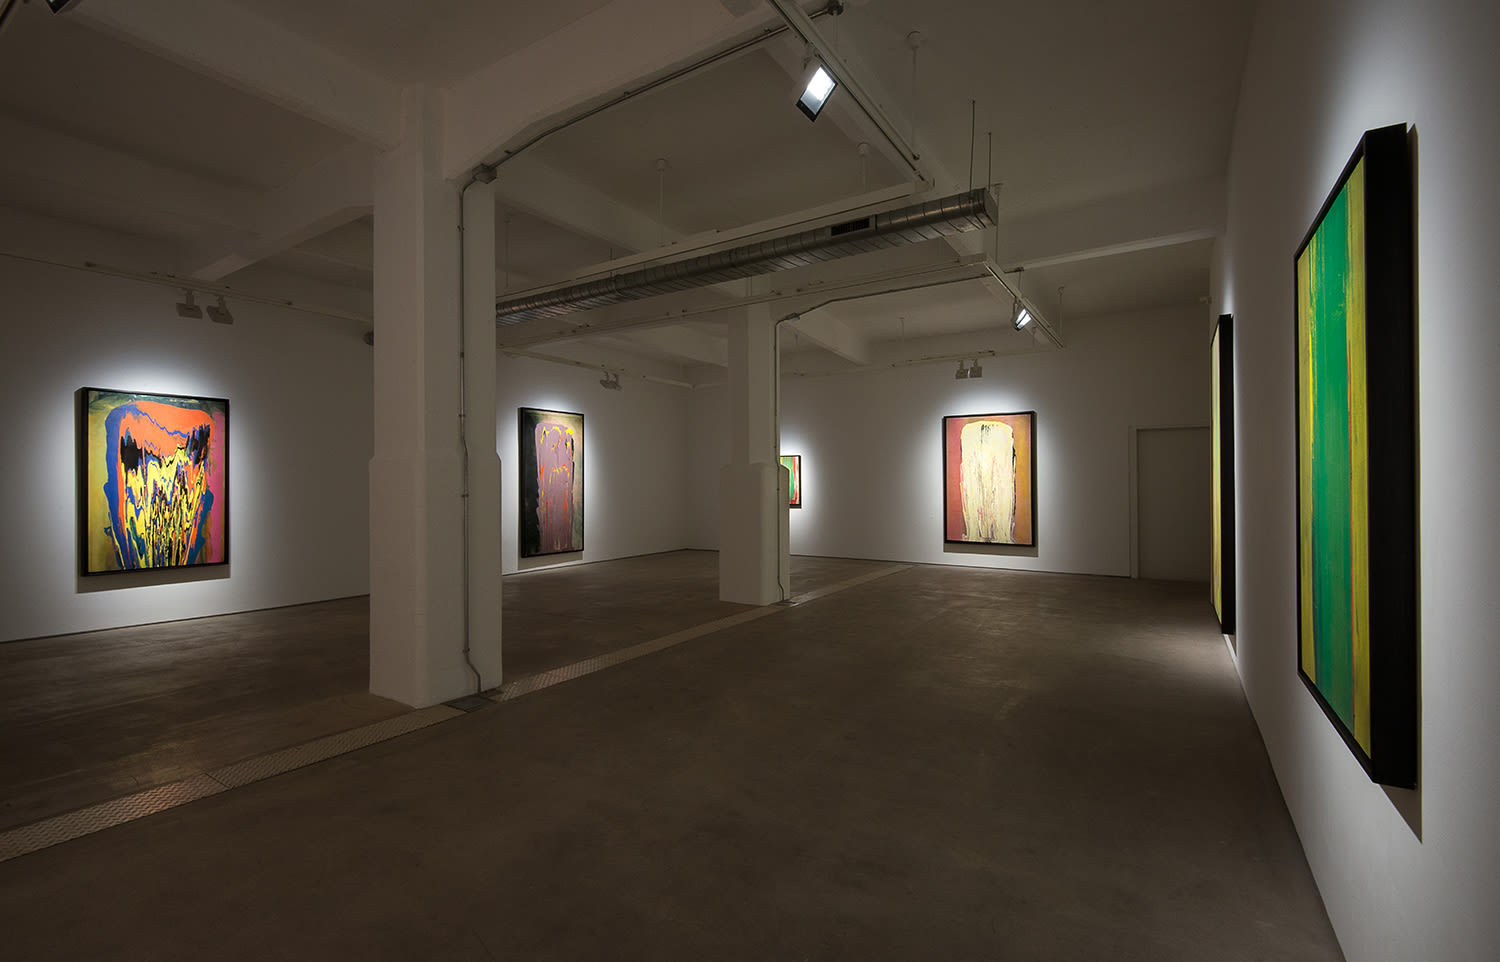 Frank Bowling, Installation view 'The Poured Paintings', Hales London, 11 September - 24 October 2015